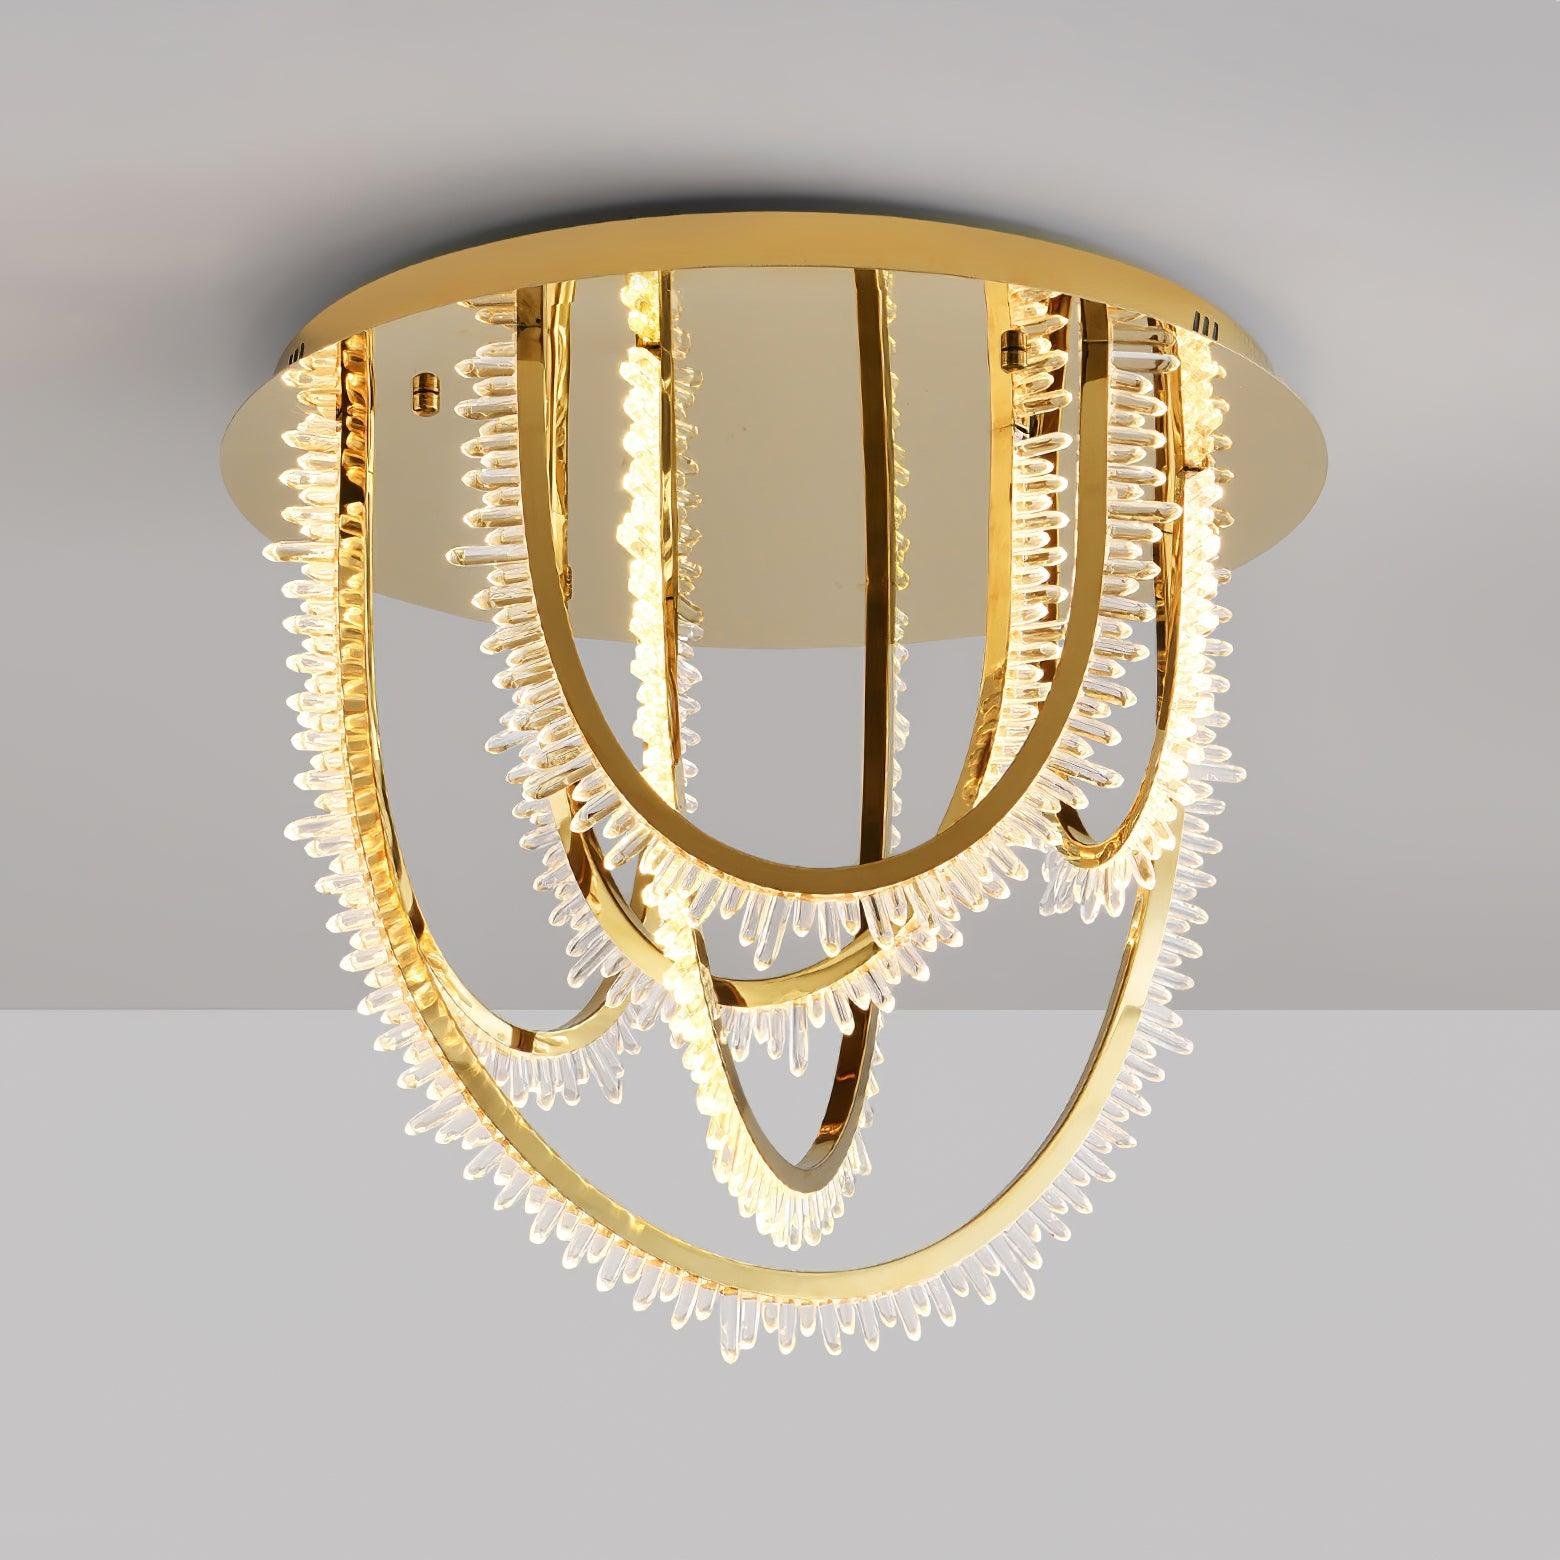 Ceiling Light with Crystal Corde, Gold Finish, Cool Light, Diameter 19.7" x Height 17.7" (50cm x 45cm)